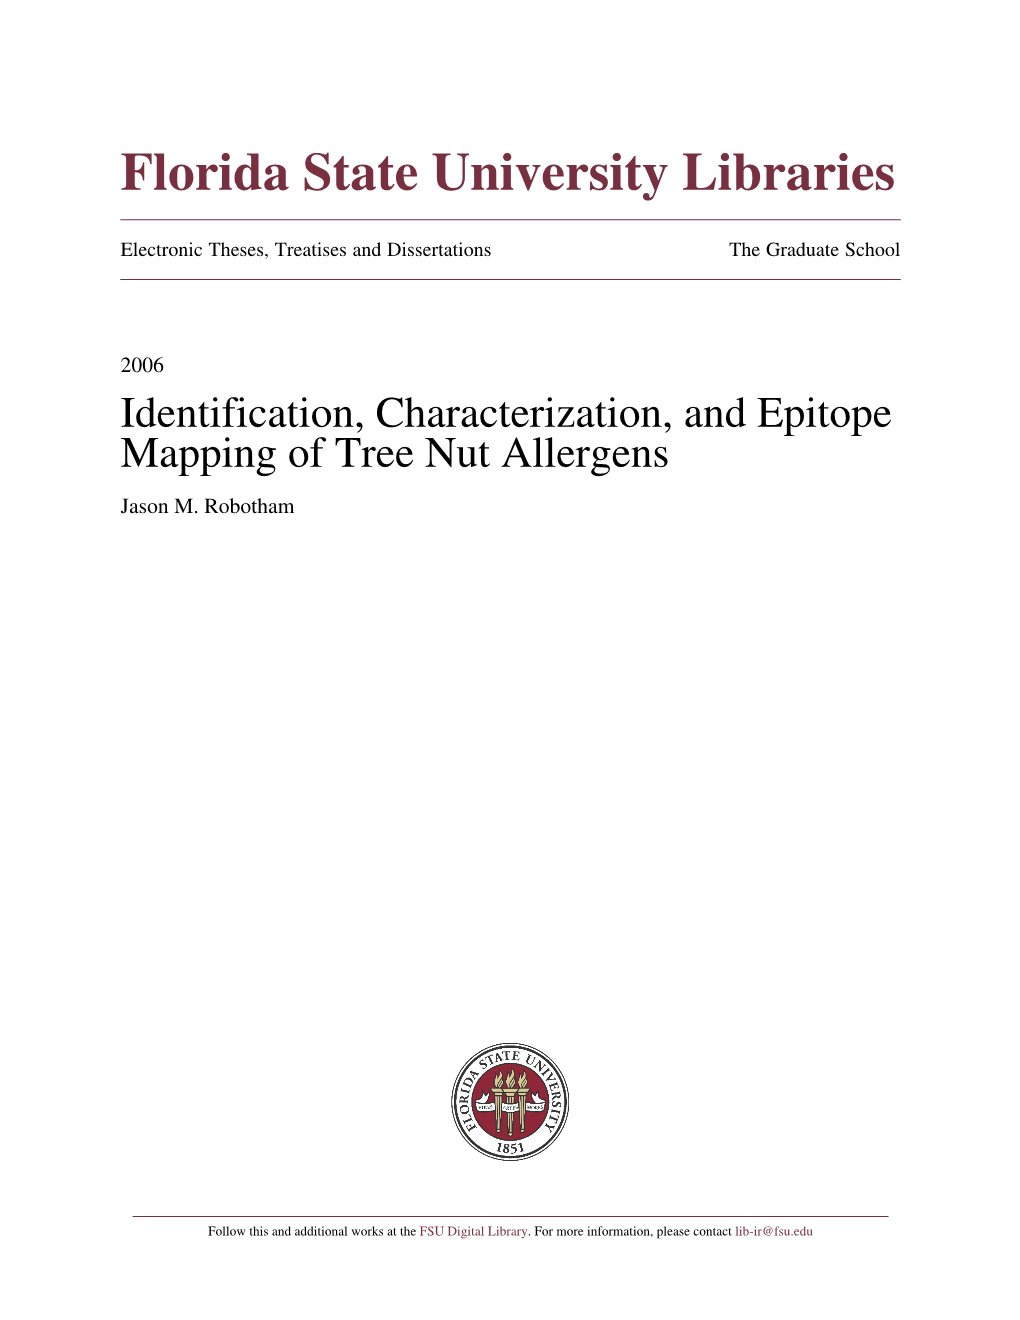 Identification, Characterization, and Epitope Mapping of Tree Nut Allergens Jason M